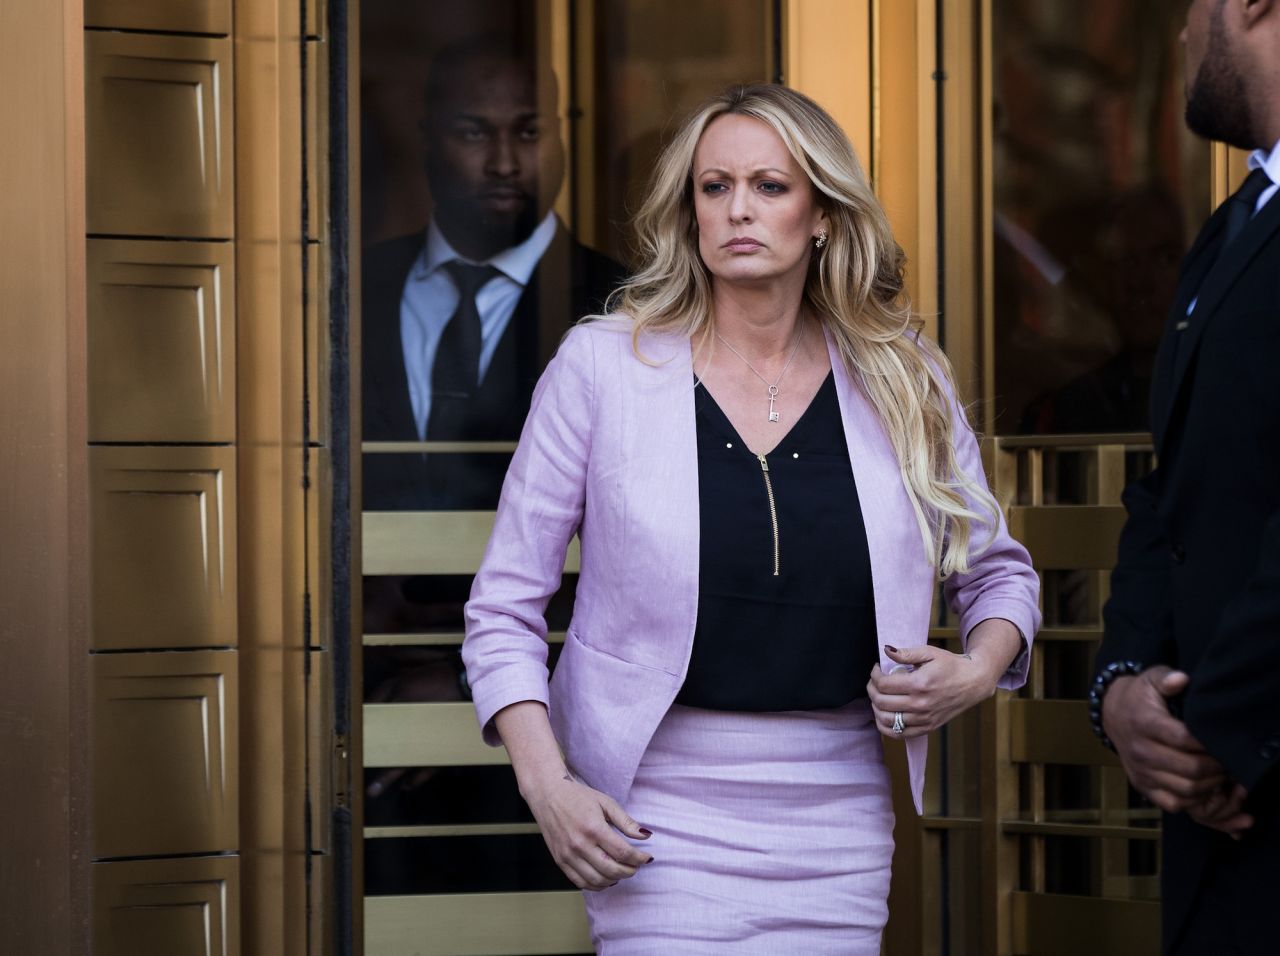 Stormy Daniels exits the federal court building in lower Manhattan on April 16, 2018.